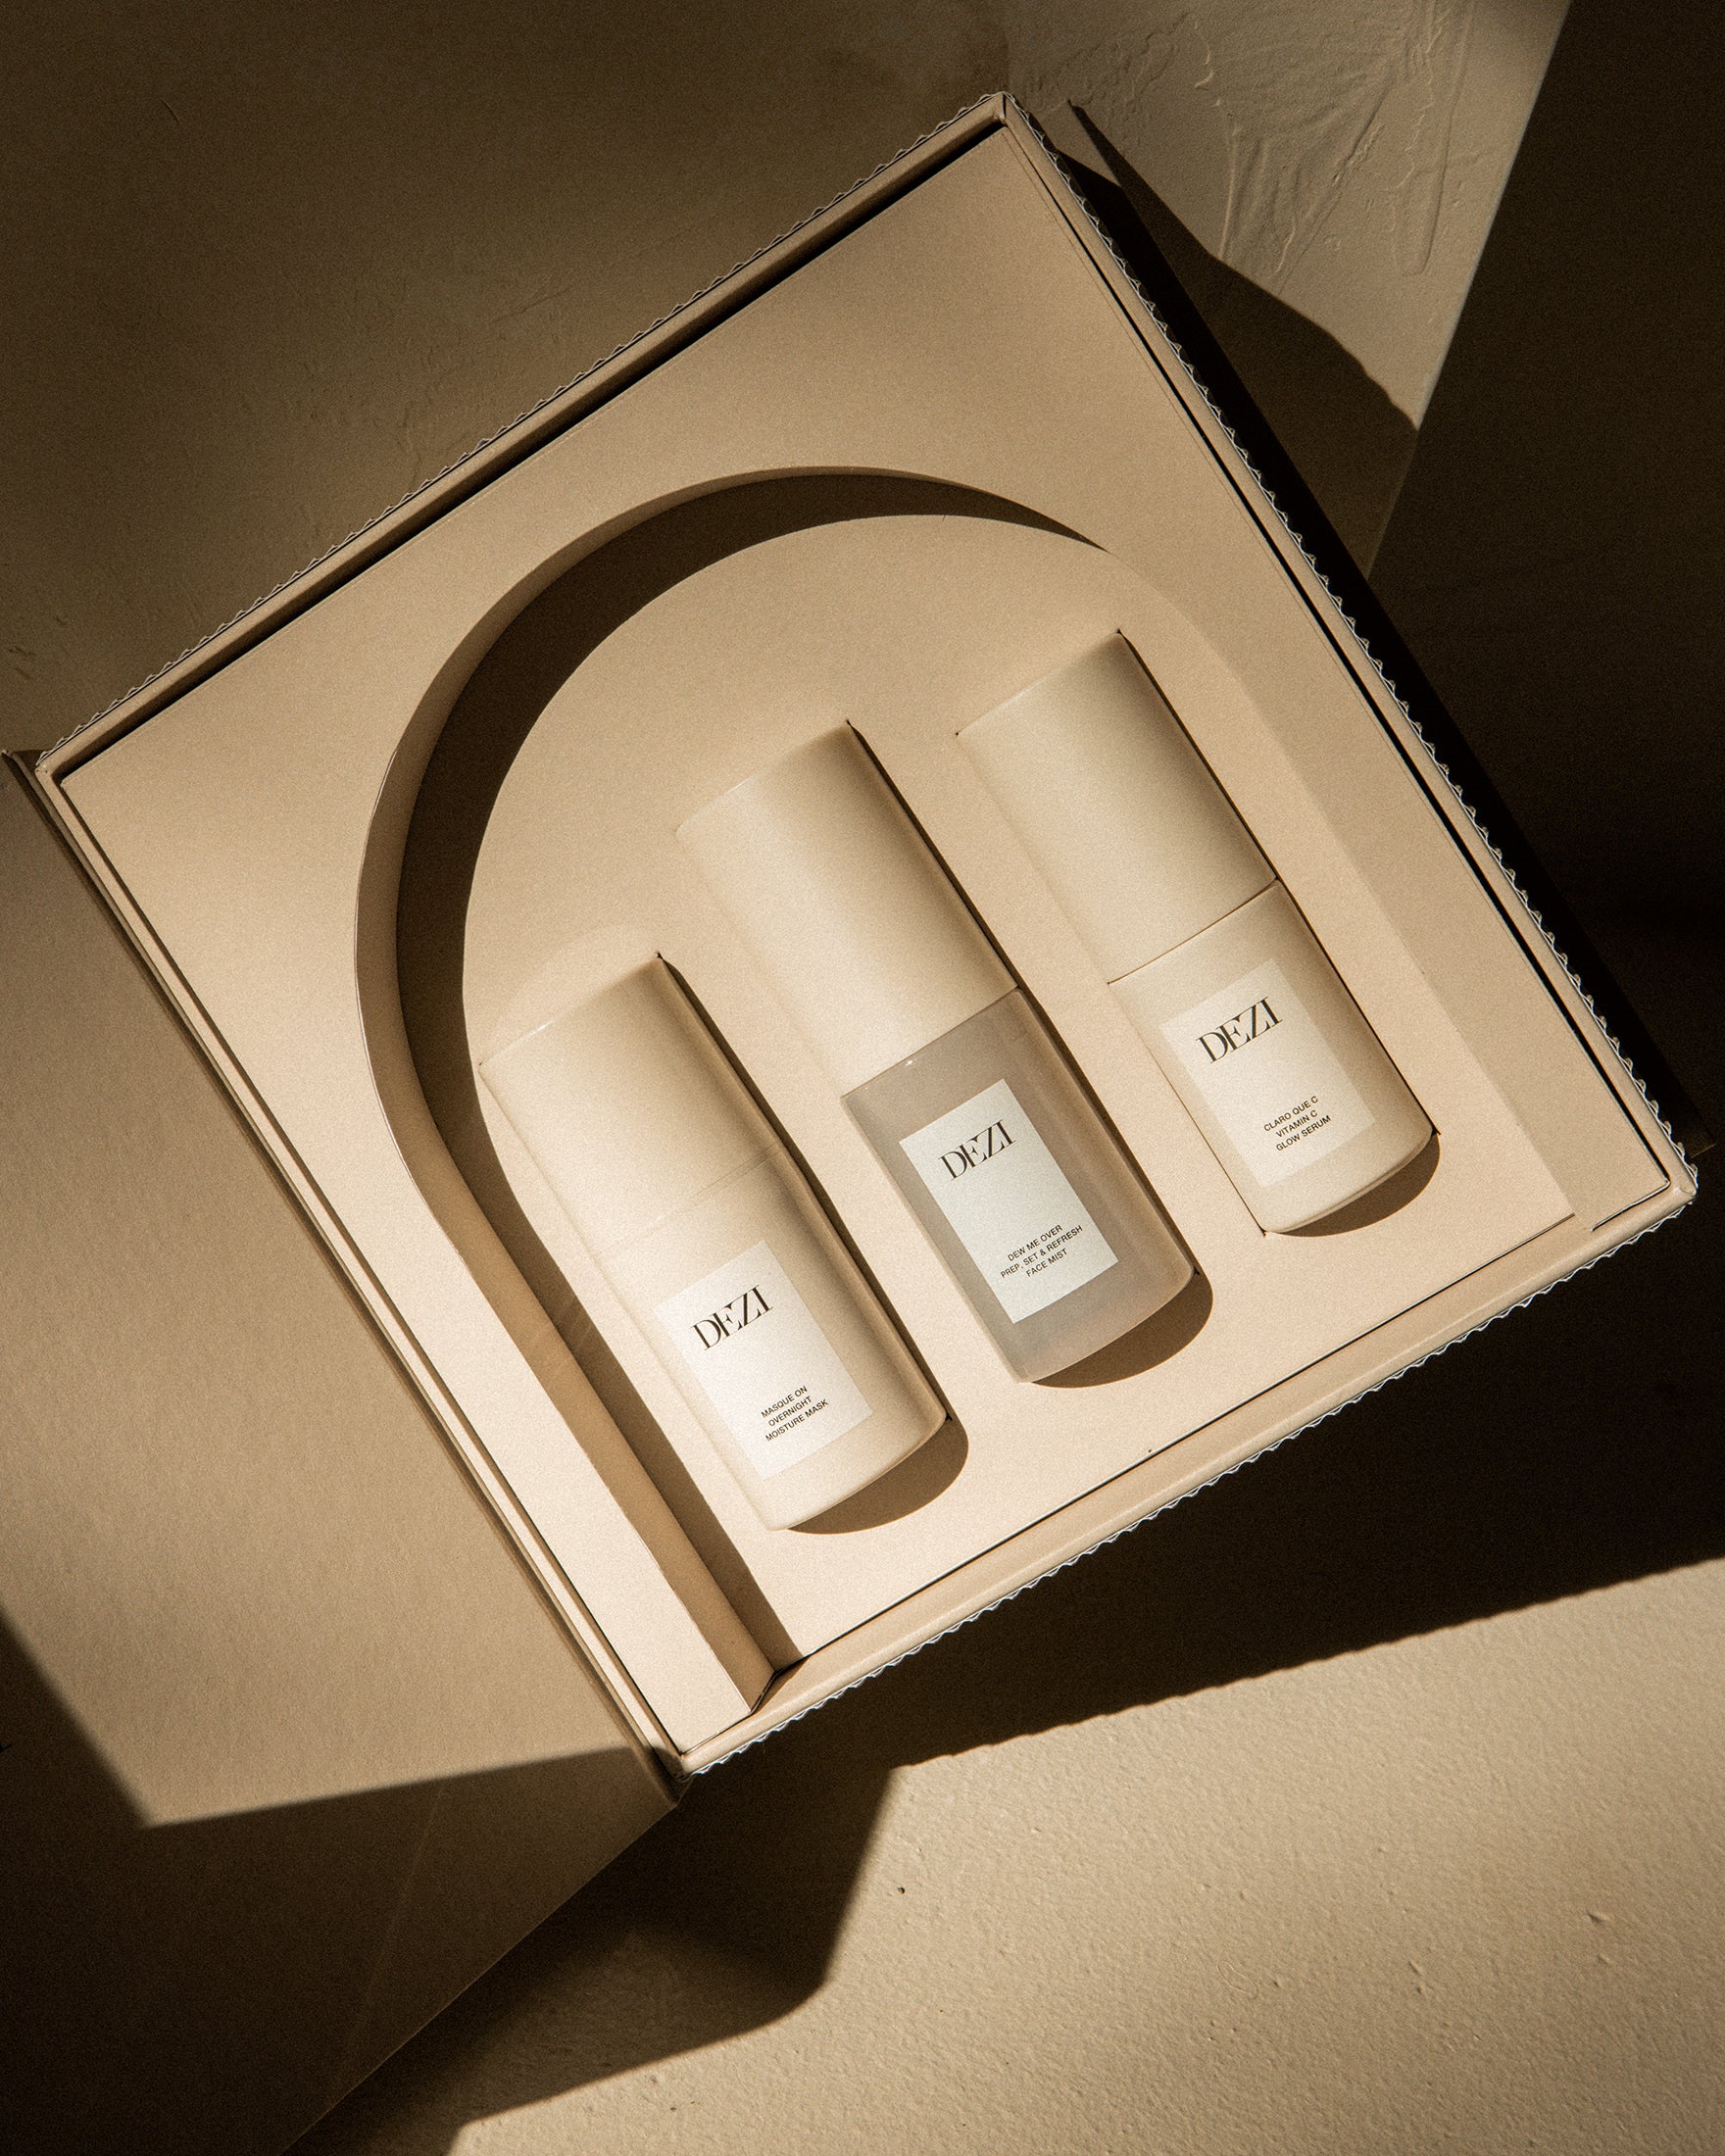 This shows three DEZI SKIN travel size products in the custom box. They are sitting in a tray that is shaped like an arch, inspired by architecture. 